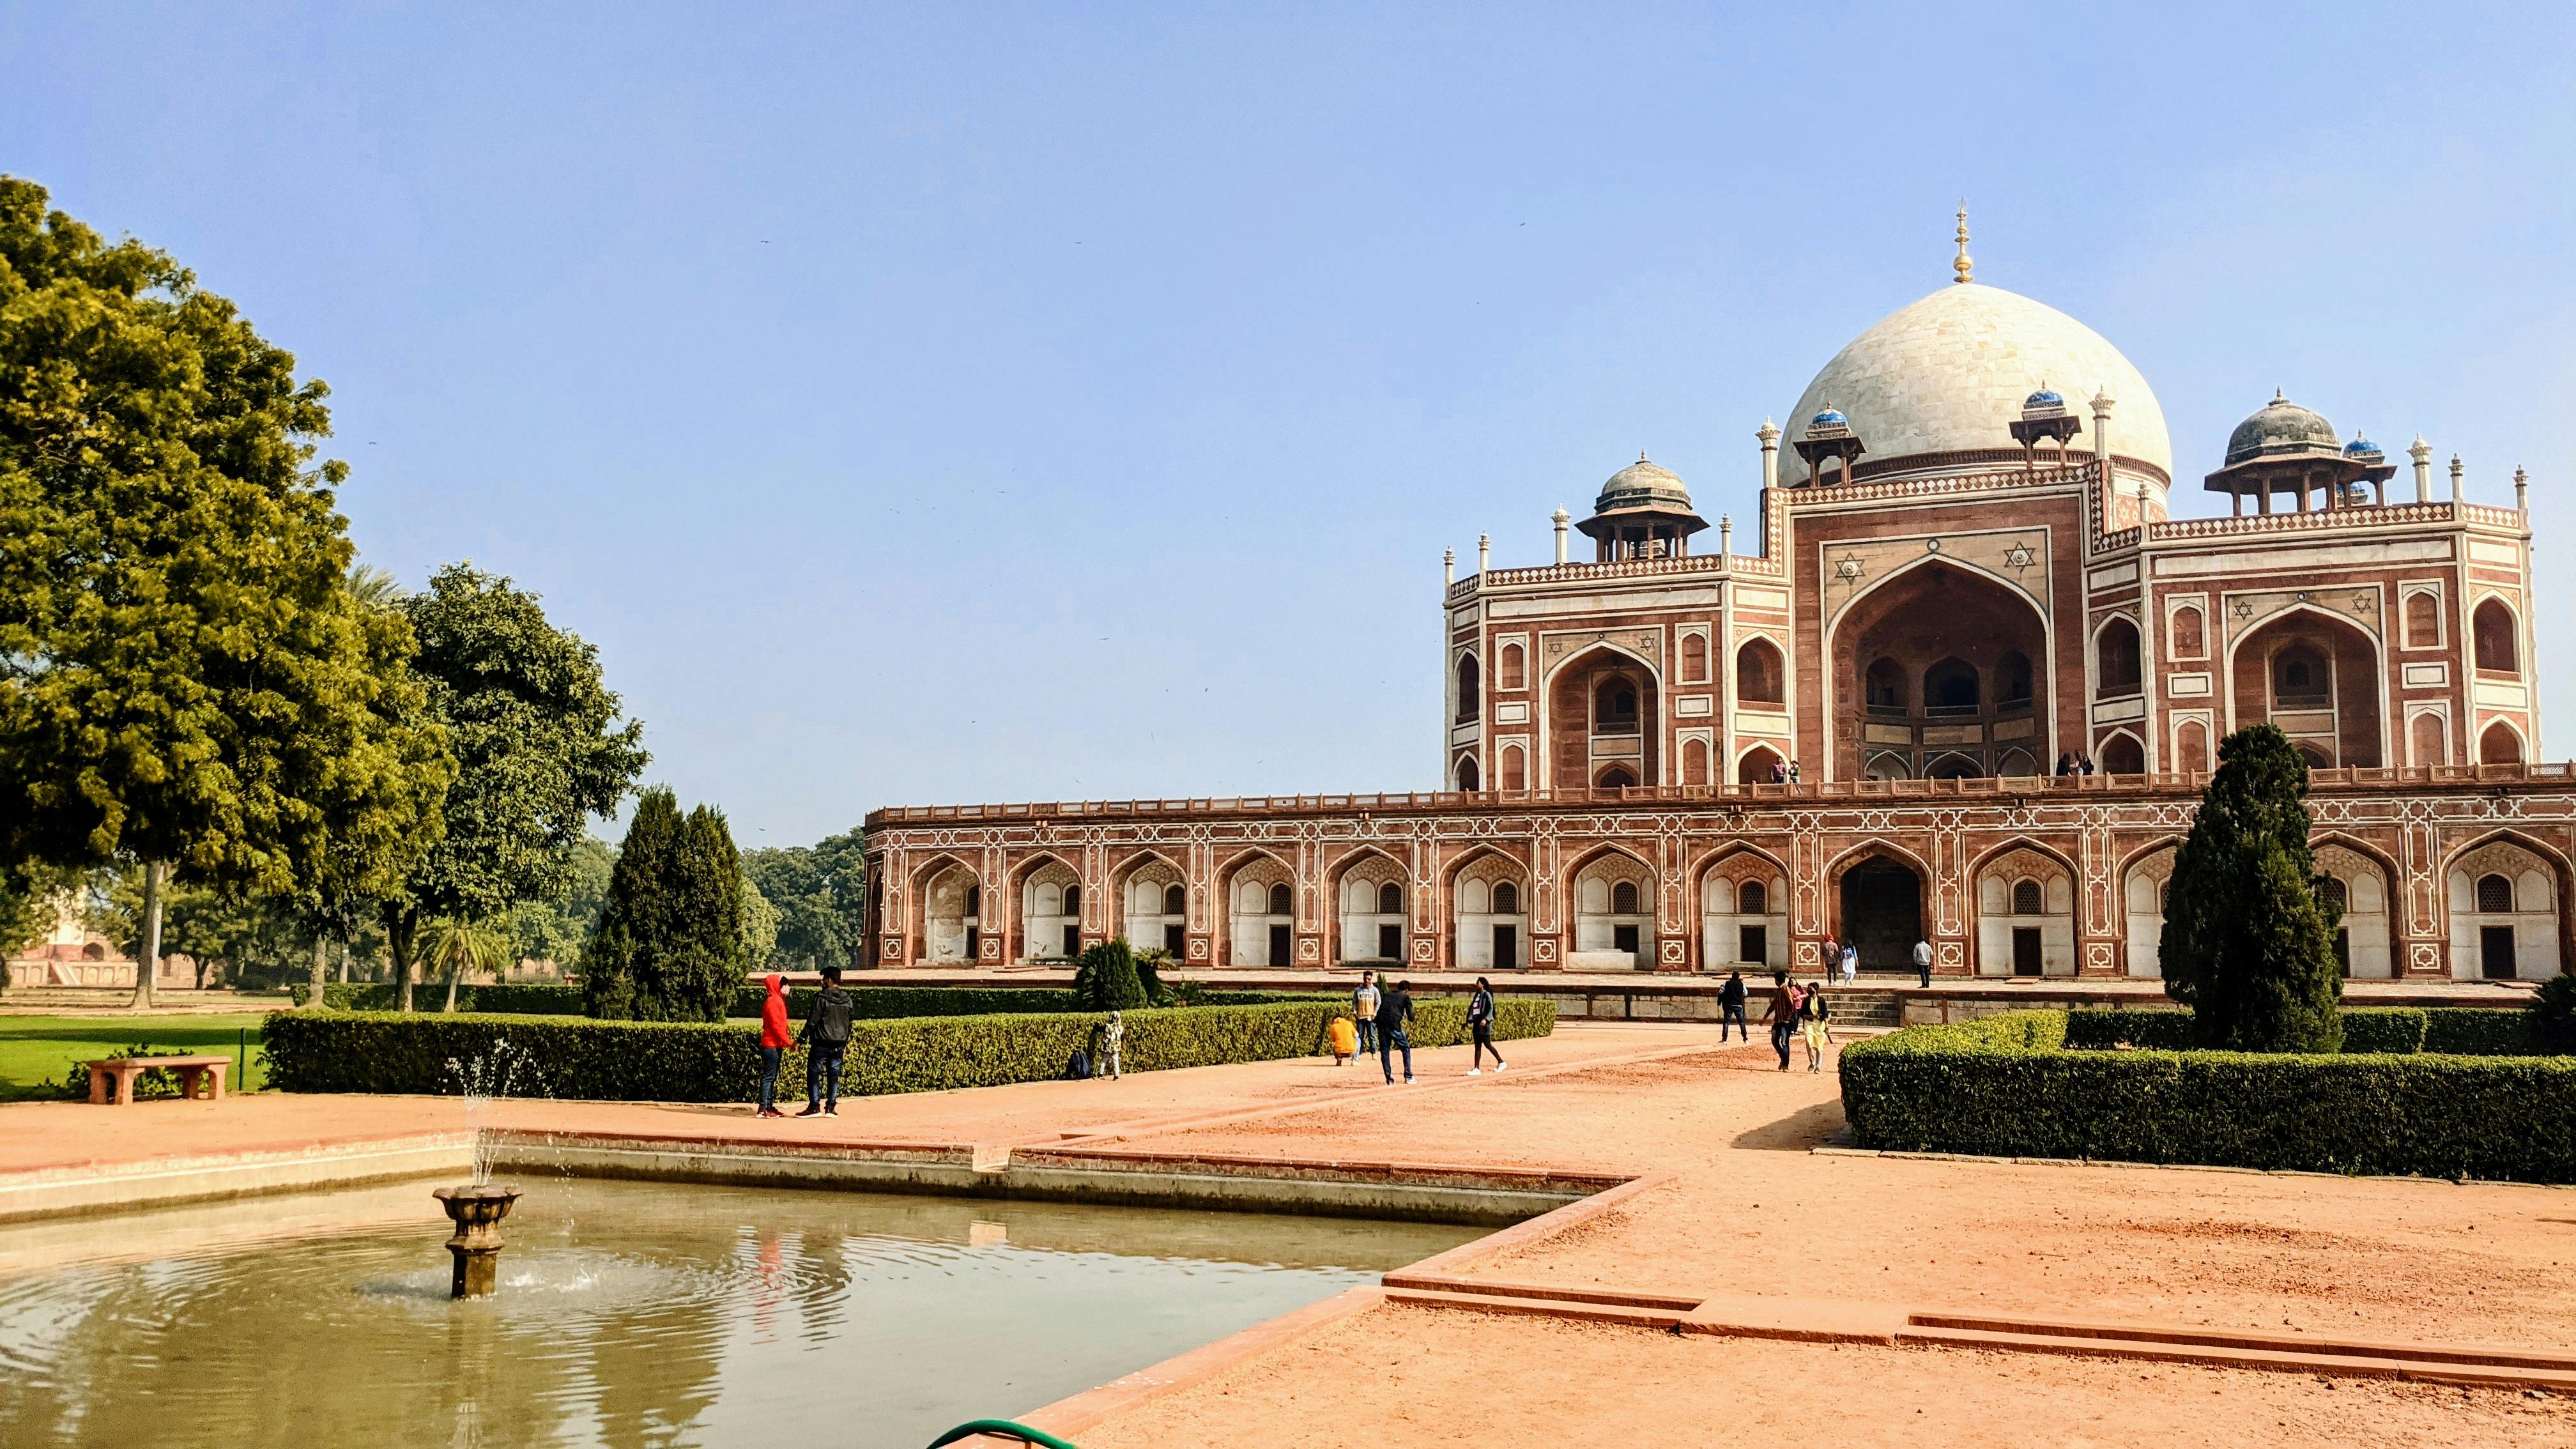 Delhi Tourism - Known as the first garden-tomb of India, the Humayun's Tomb  is a brilliant example of Mughal architecture. Interestingly, it was  constructed 9 years after the death of the Mughal